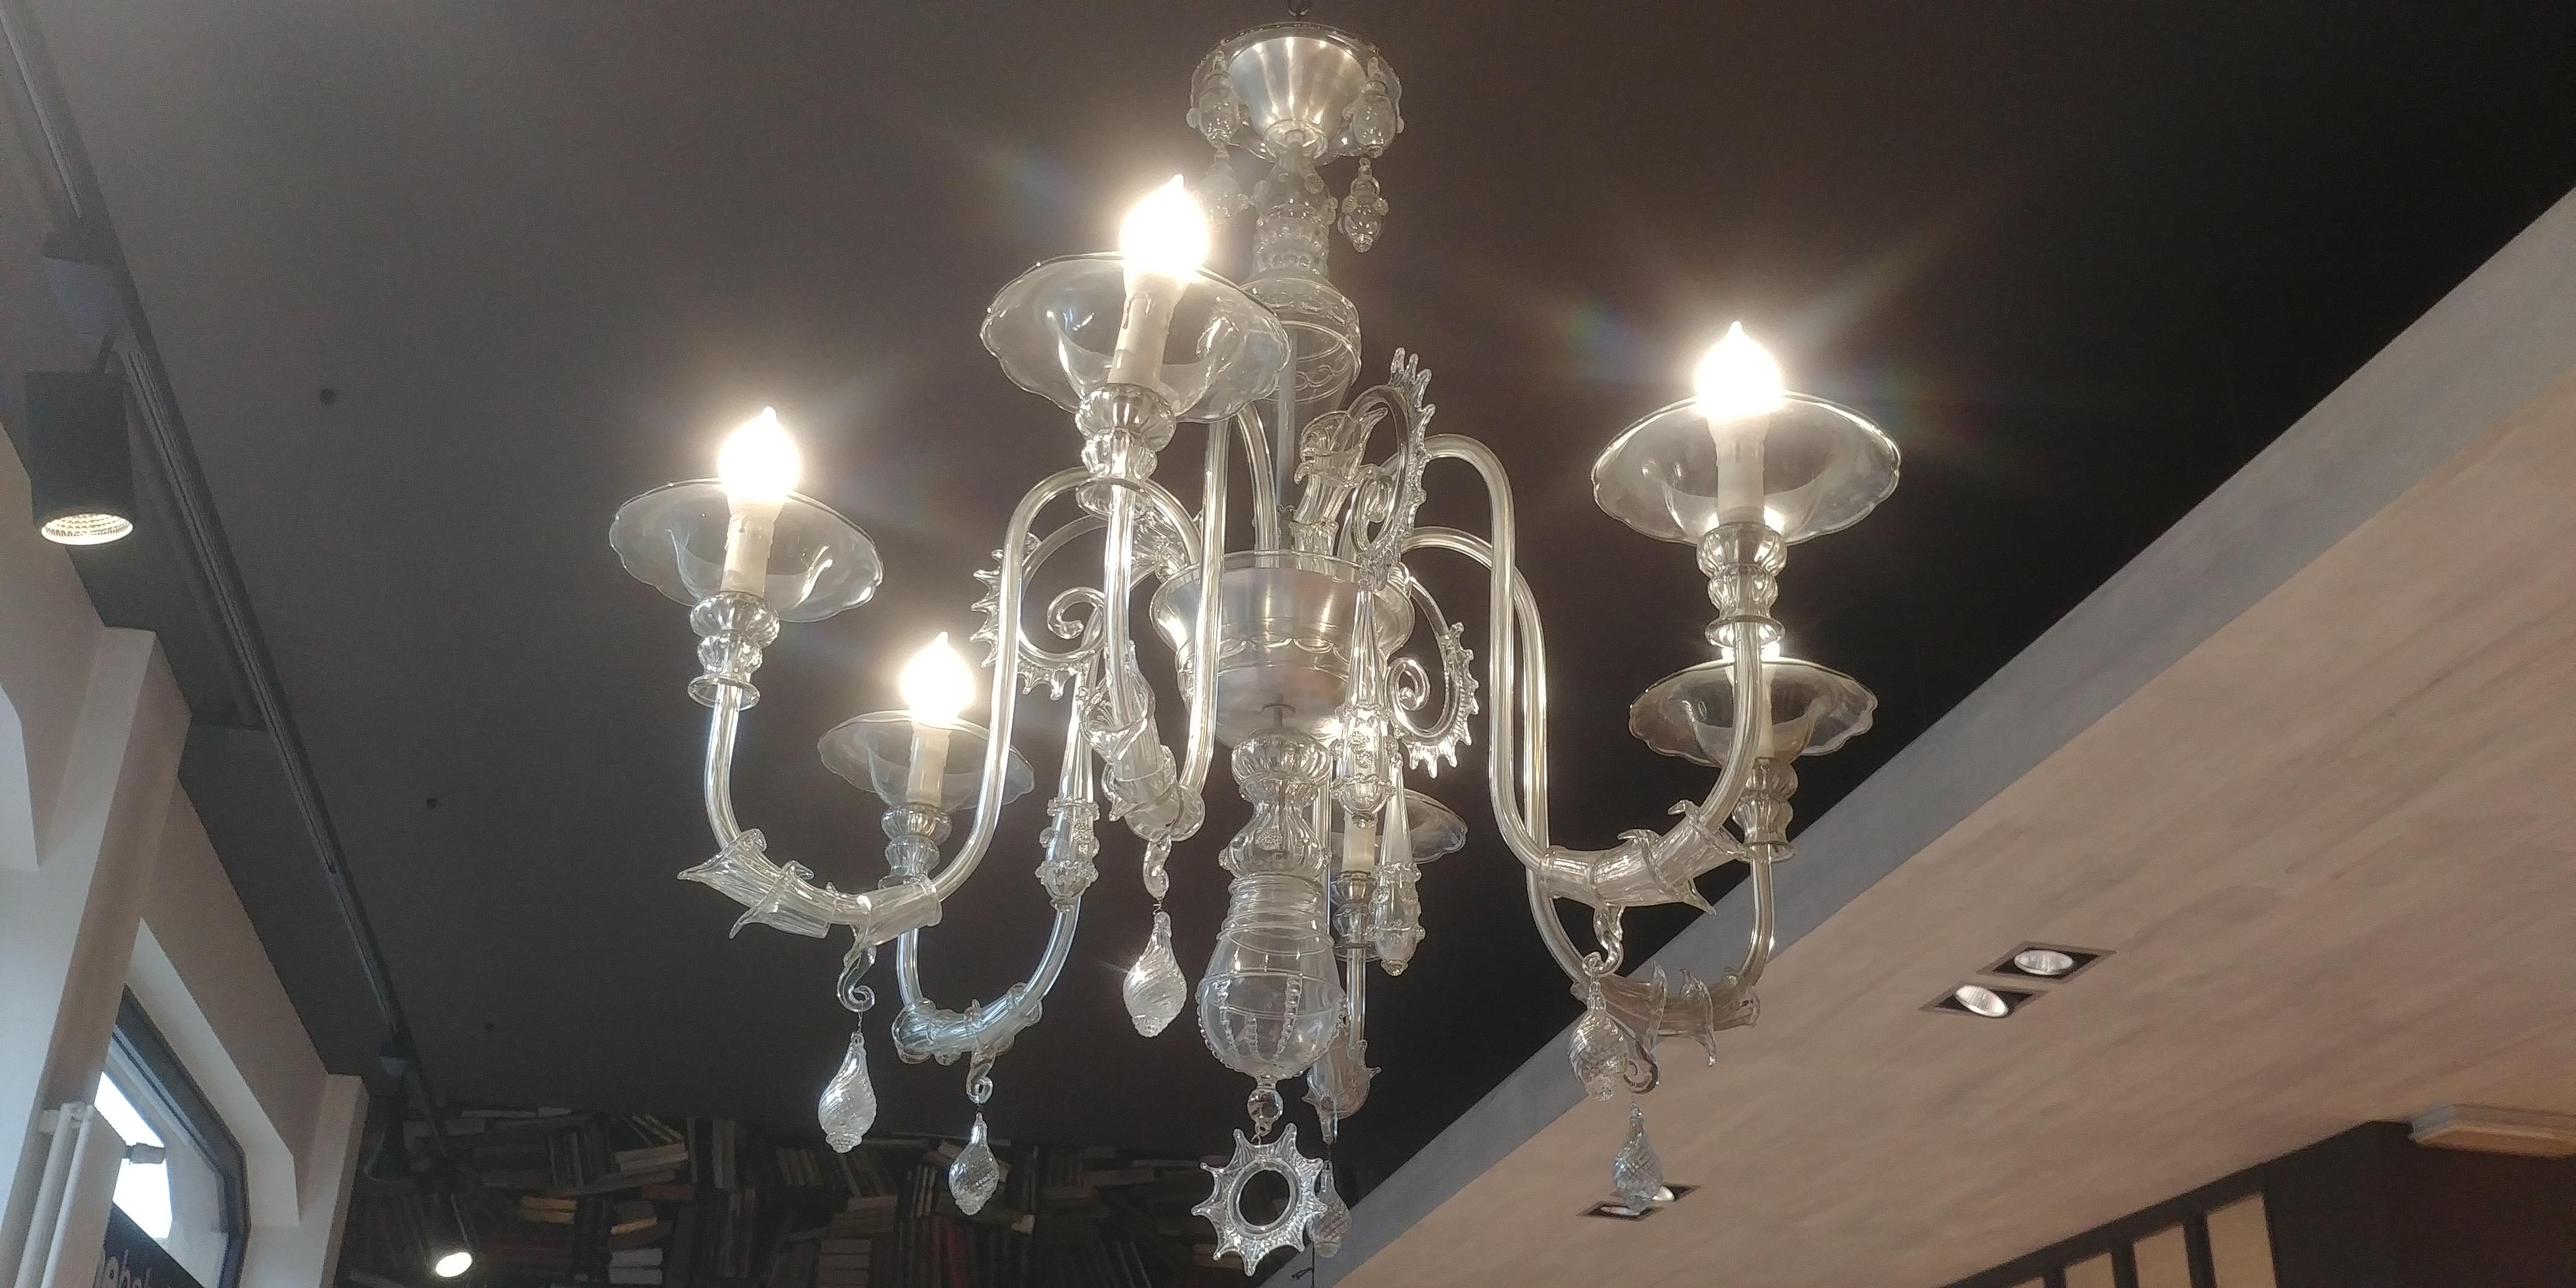 This Murano chandelier suited for large spaces, signed by Barovier & Toso and made in Murano (Venice, Italy) in the 1950, its characterized by sinuous and elegant lines.
Each production of Barovier & Toso by Murano glass craftsmanship is the mark of